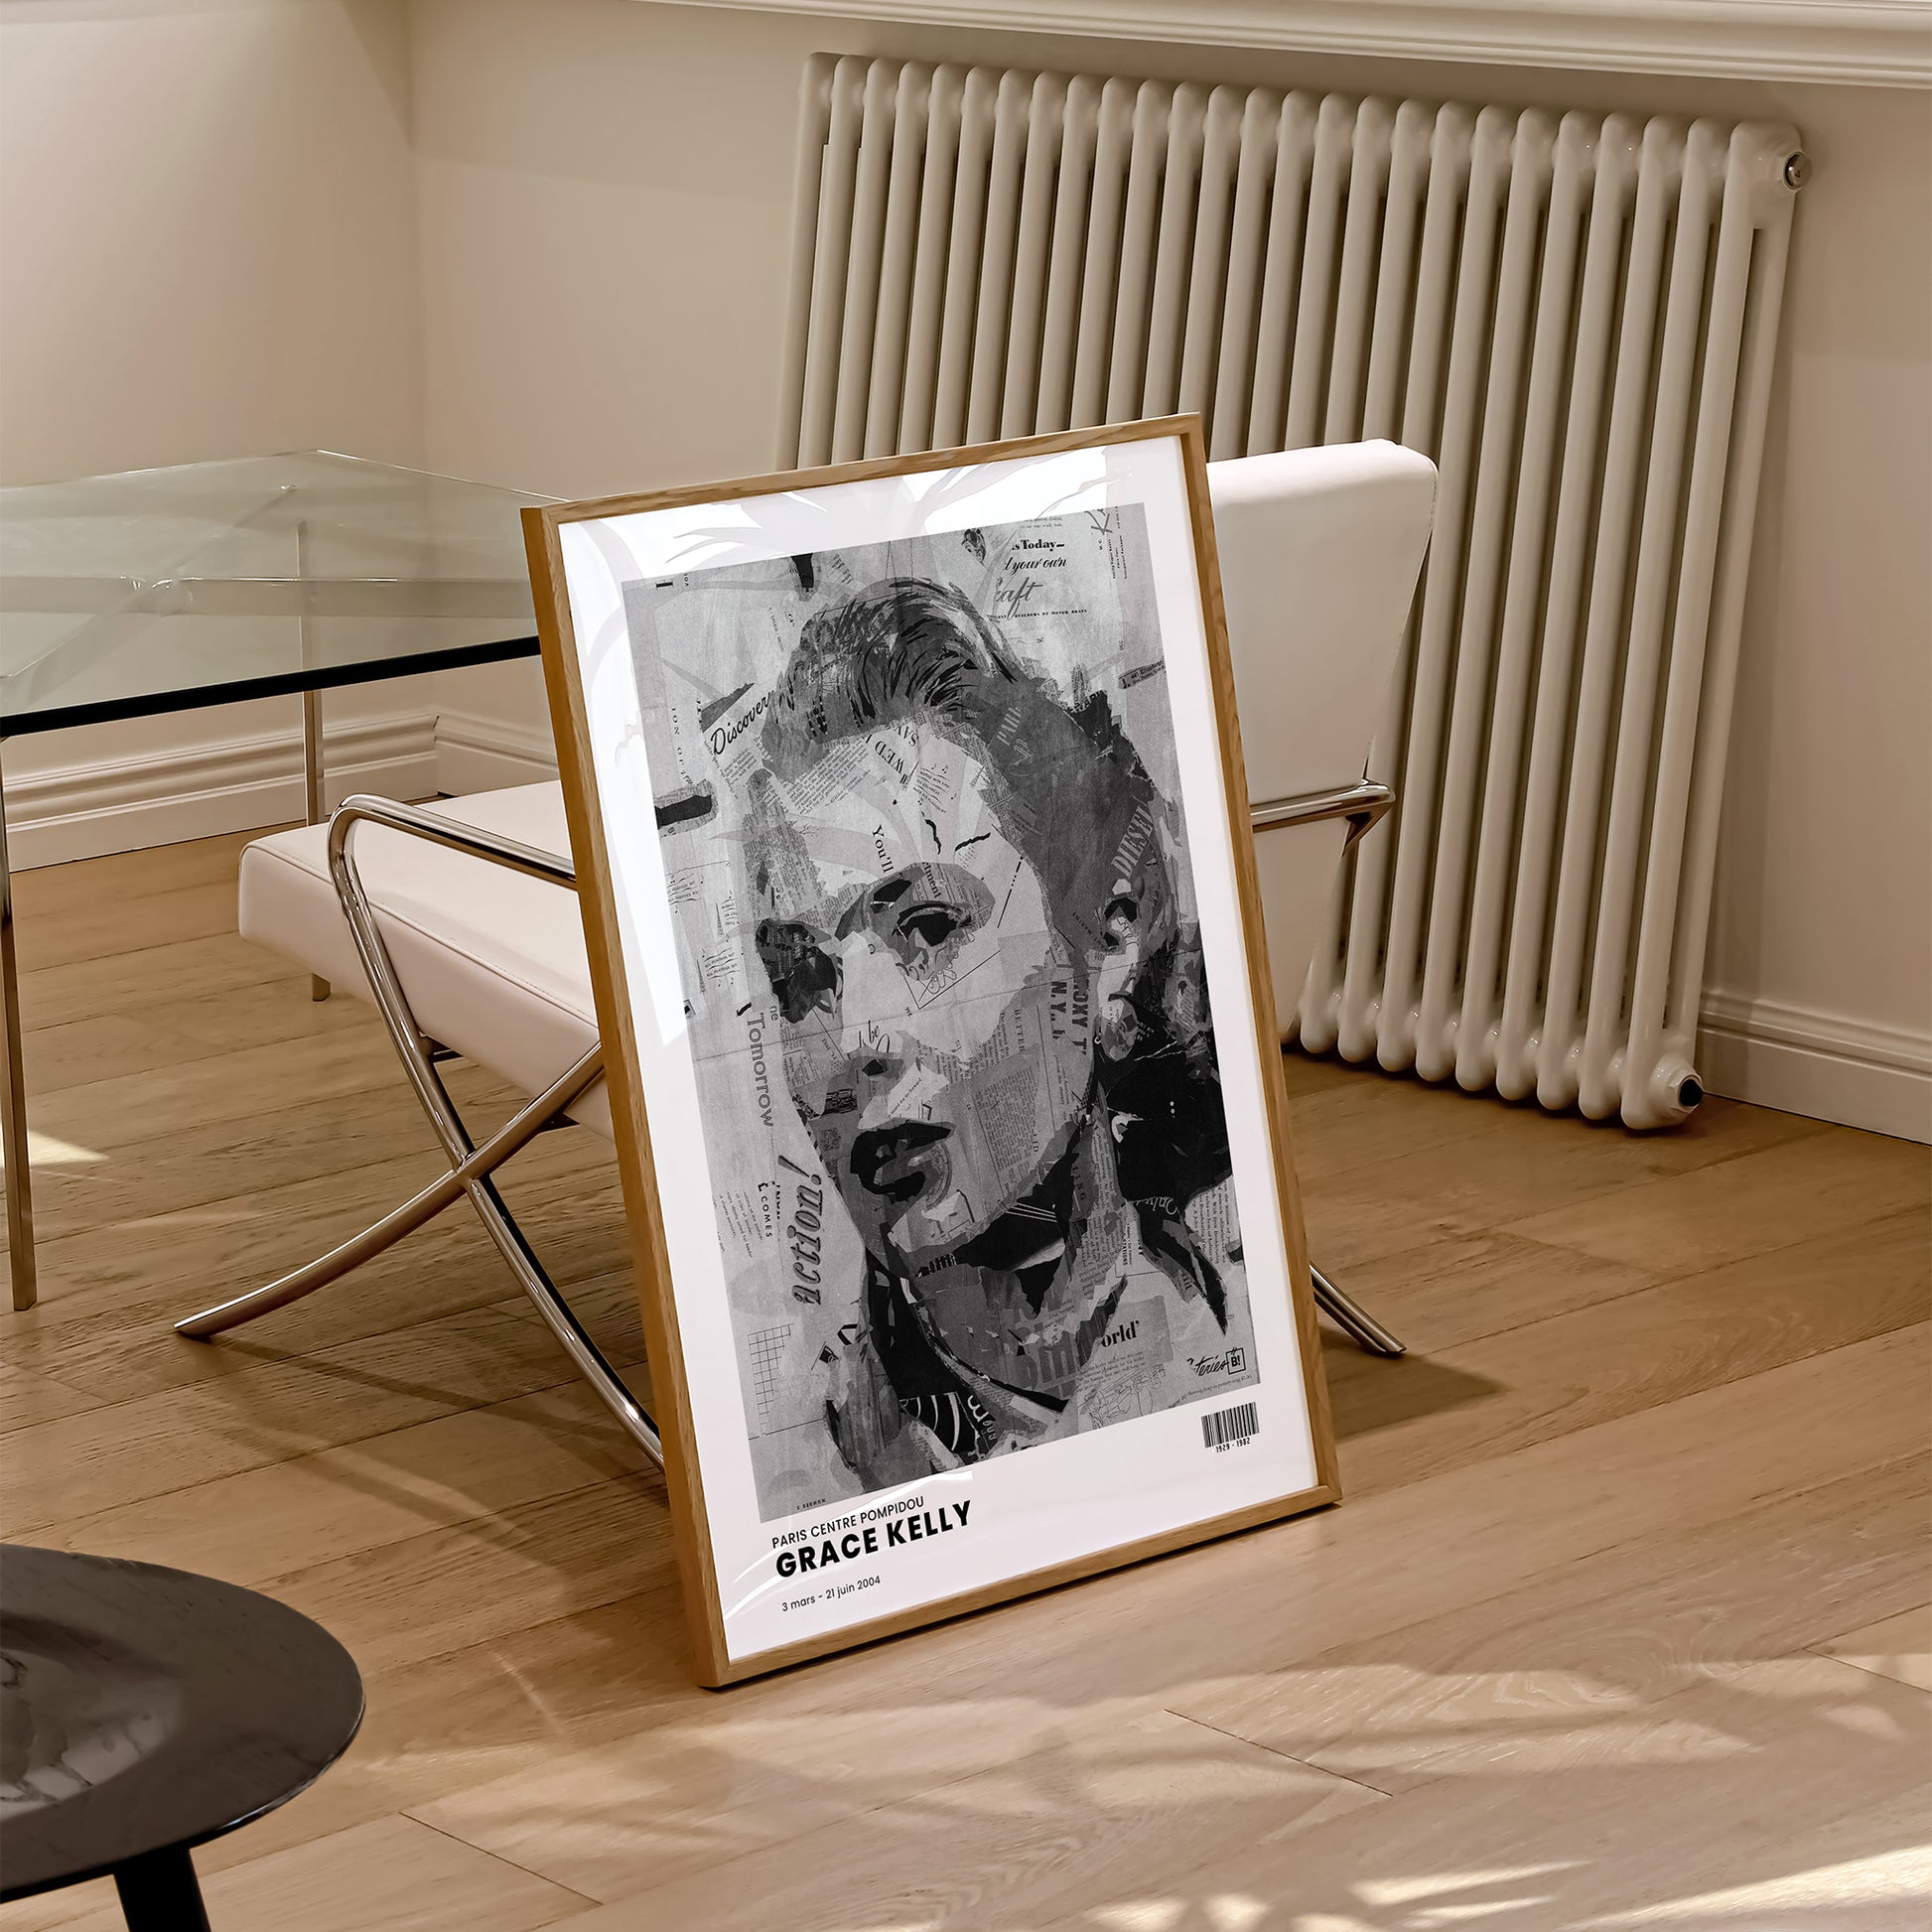 Be inspired by Iconic Grace Kelly Paris Centre Pompidou Exhibition Art Print. The artwork is presented in a natural wood frame that captures its timeless beauty in every detail.